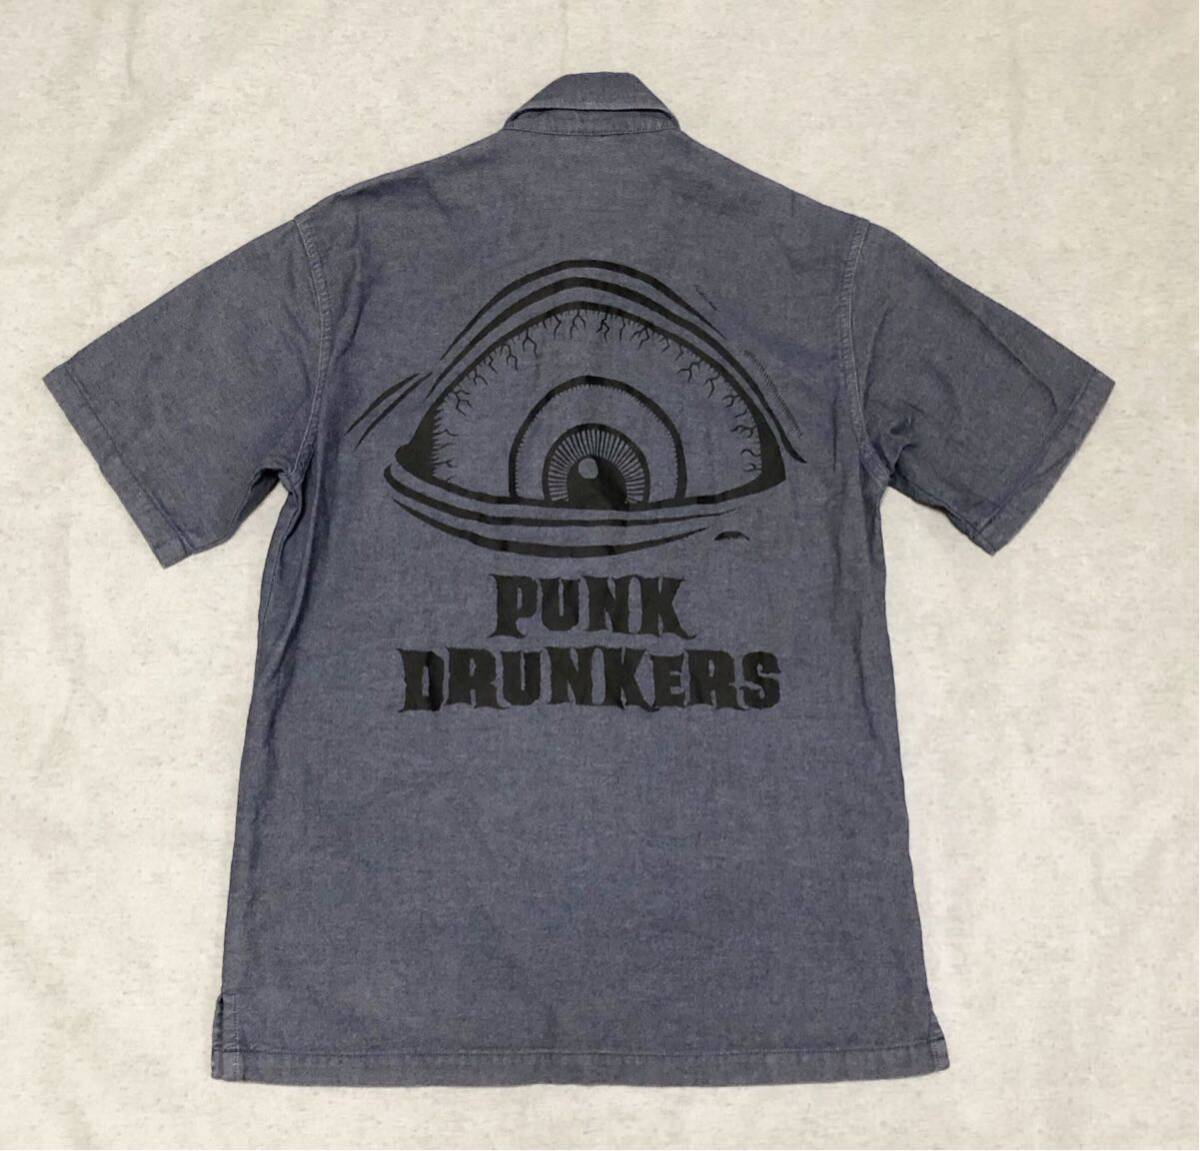 767*PUNK DRUNKERS punk gong n The Cars * one-eyed . embroidery big Logo Medama print cotton short sleeves shirt navy 